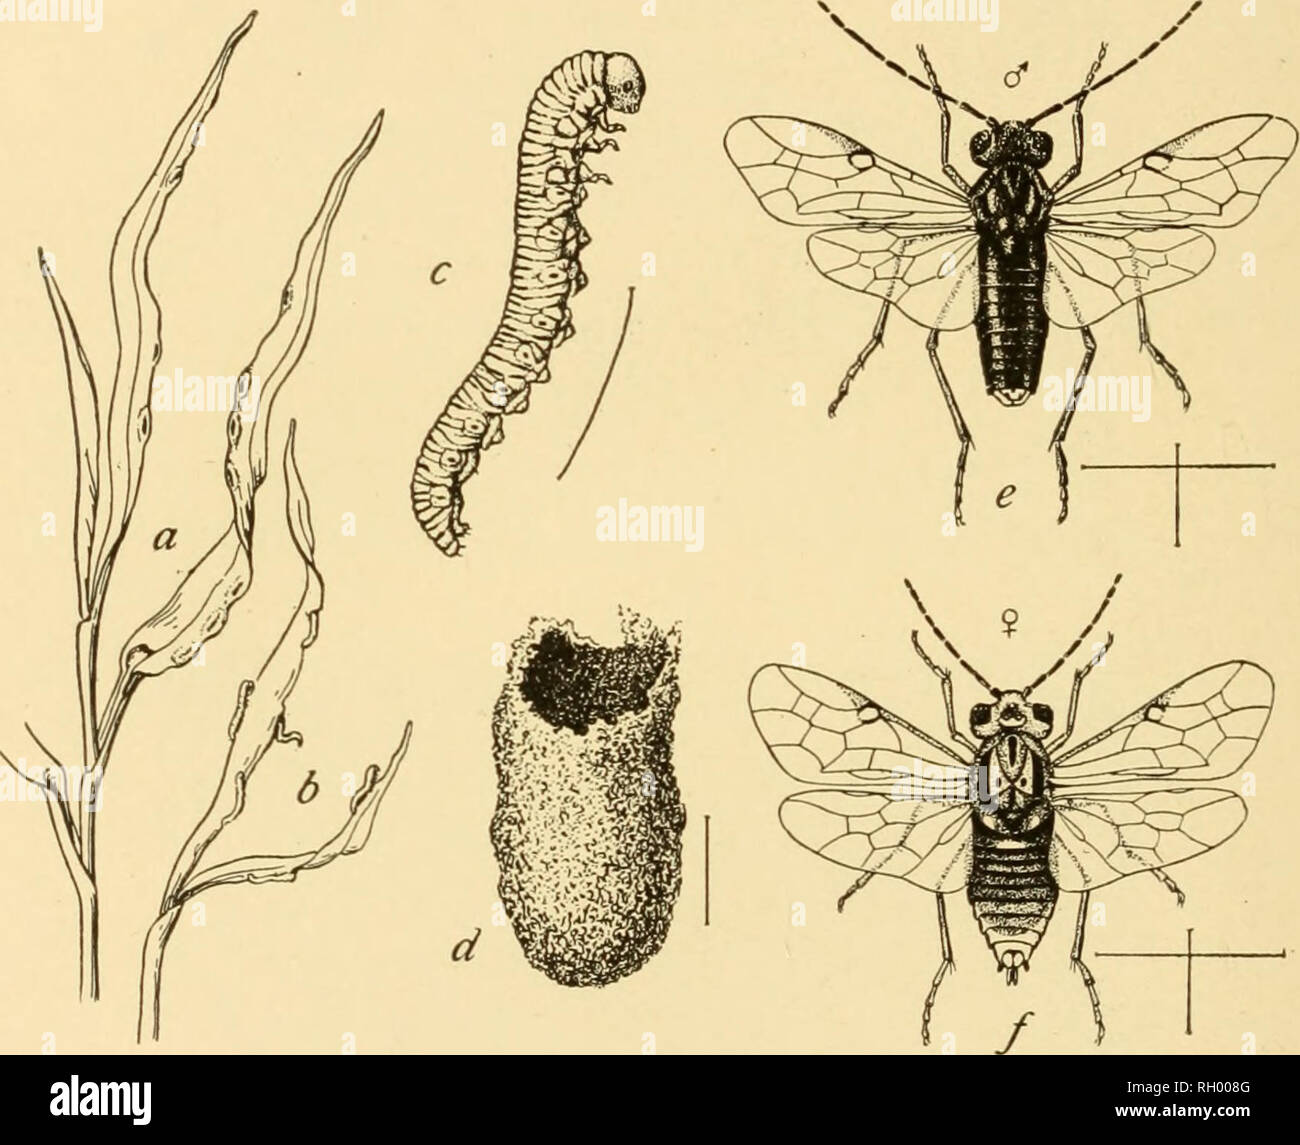 . Bulletin. Geography. 282 PRAIRIE COMMUNITIES fissilis), of the strawberry flea-beetle {Typophorus canellus), and the corn rootw'orms (Diabroiica) (174), and of many other insects well known in economic literature, burrow into the roots of the plants in the larval stage. Many of the grass-eating cutworms, caterpillars, and sawflies (Fig. 287) pupate beneath the surface of the ground. The salamander {Amhlystoma tigrinum) spends ten months of each year buried in the mud of such temporary ponds. The Pennsylvania meadow-mouse {Microtus pennsylvanicus Or.) has been common in these situations.. Fig Stock Photo